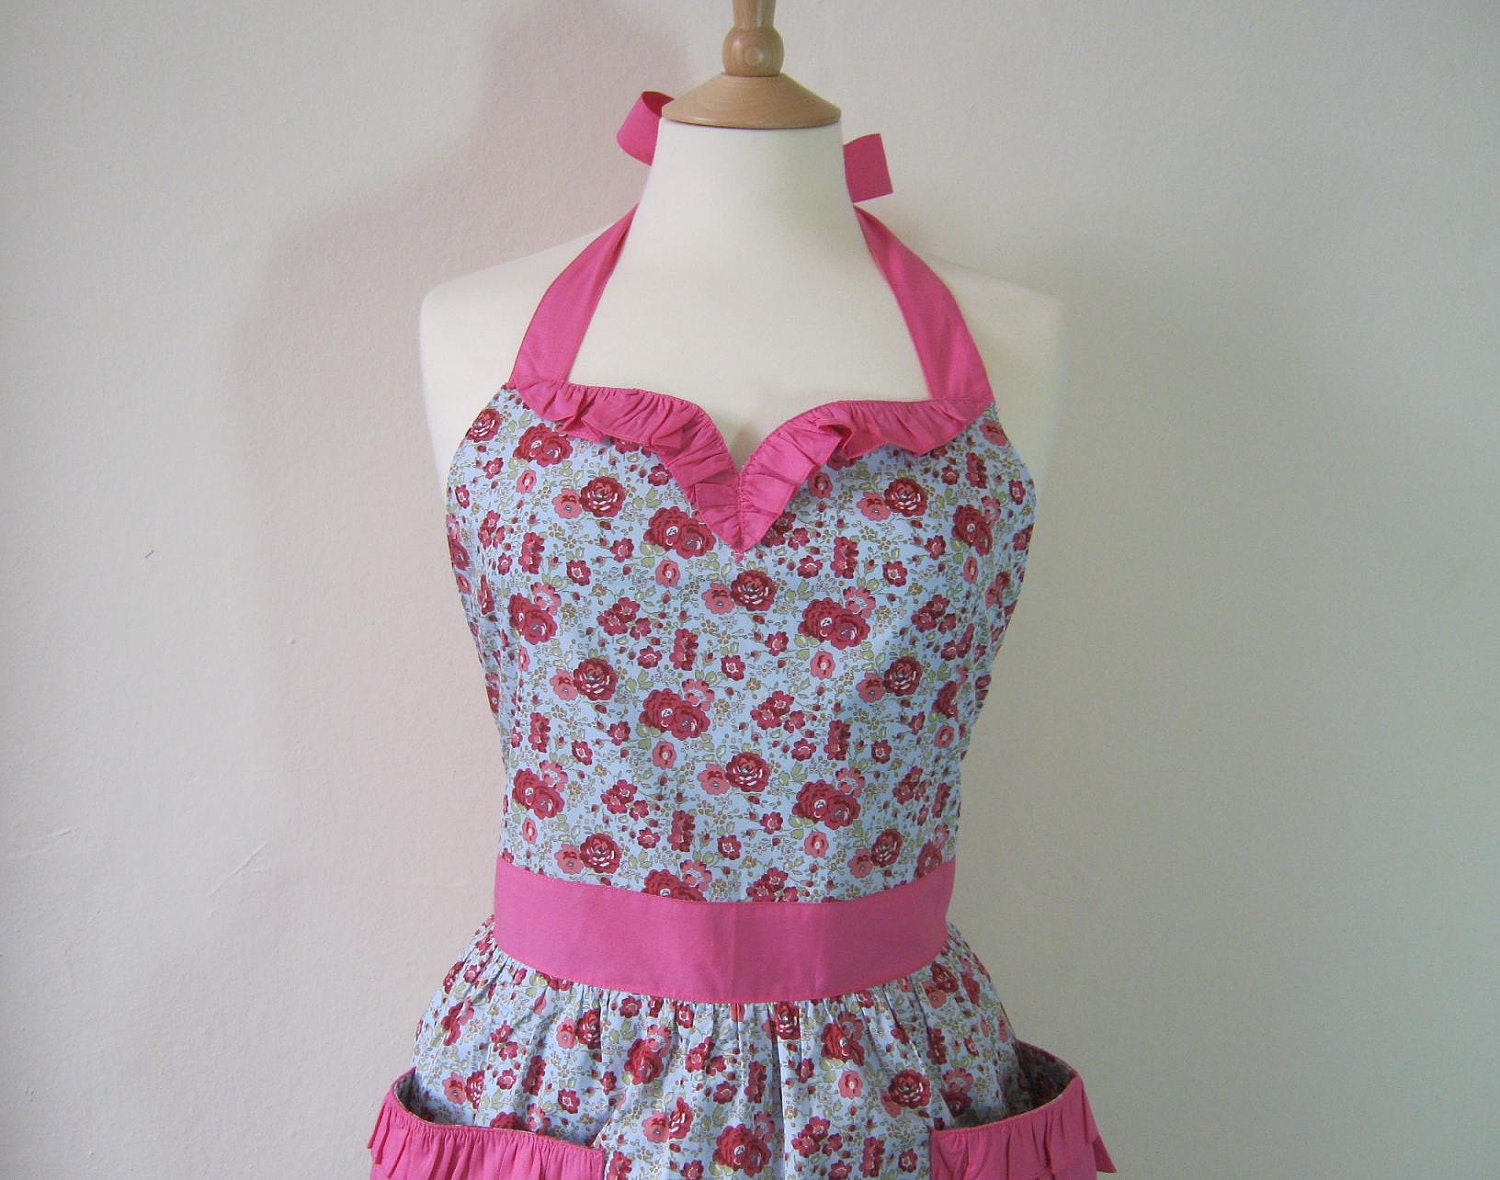 Vintage inspired 1950s apron with curve ruffle red and pink